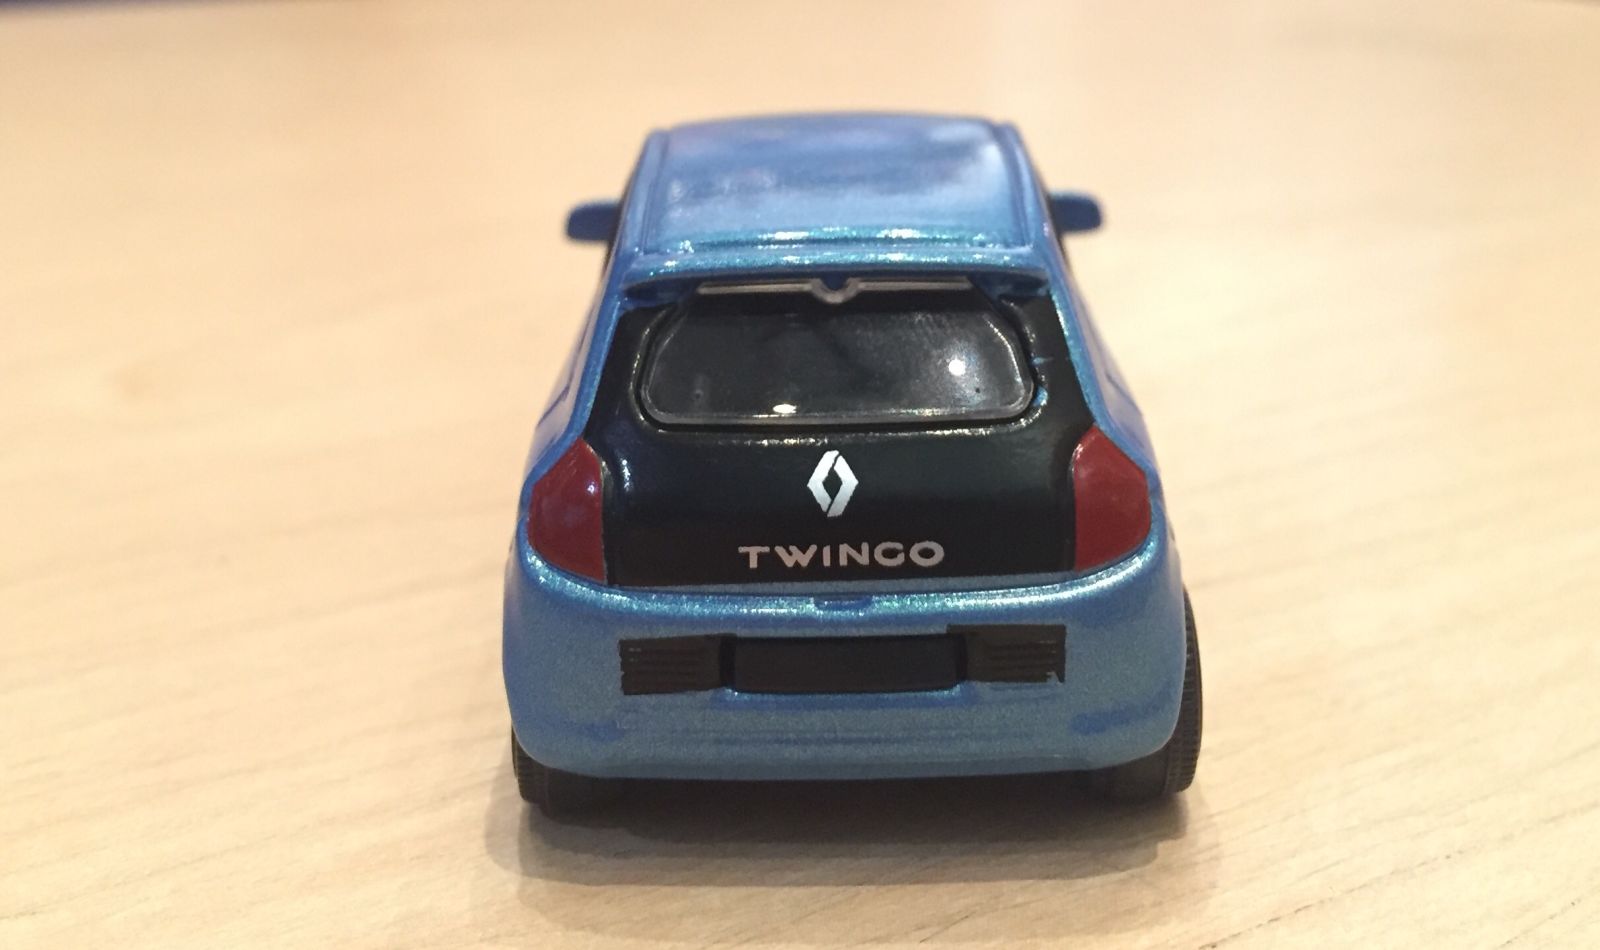 Painted taillights, Renault diamond badge and Twingo wording badge tampos are a nice touch on a small toy.